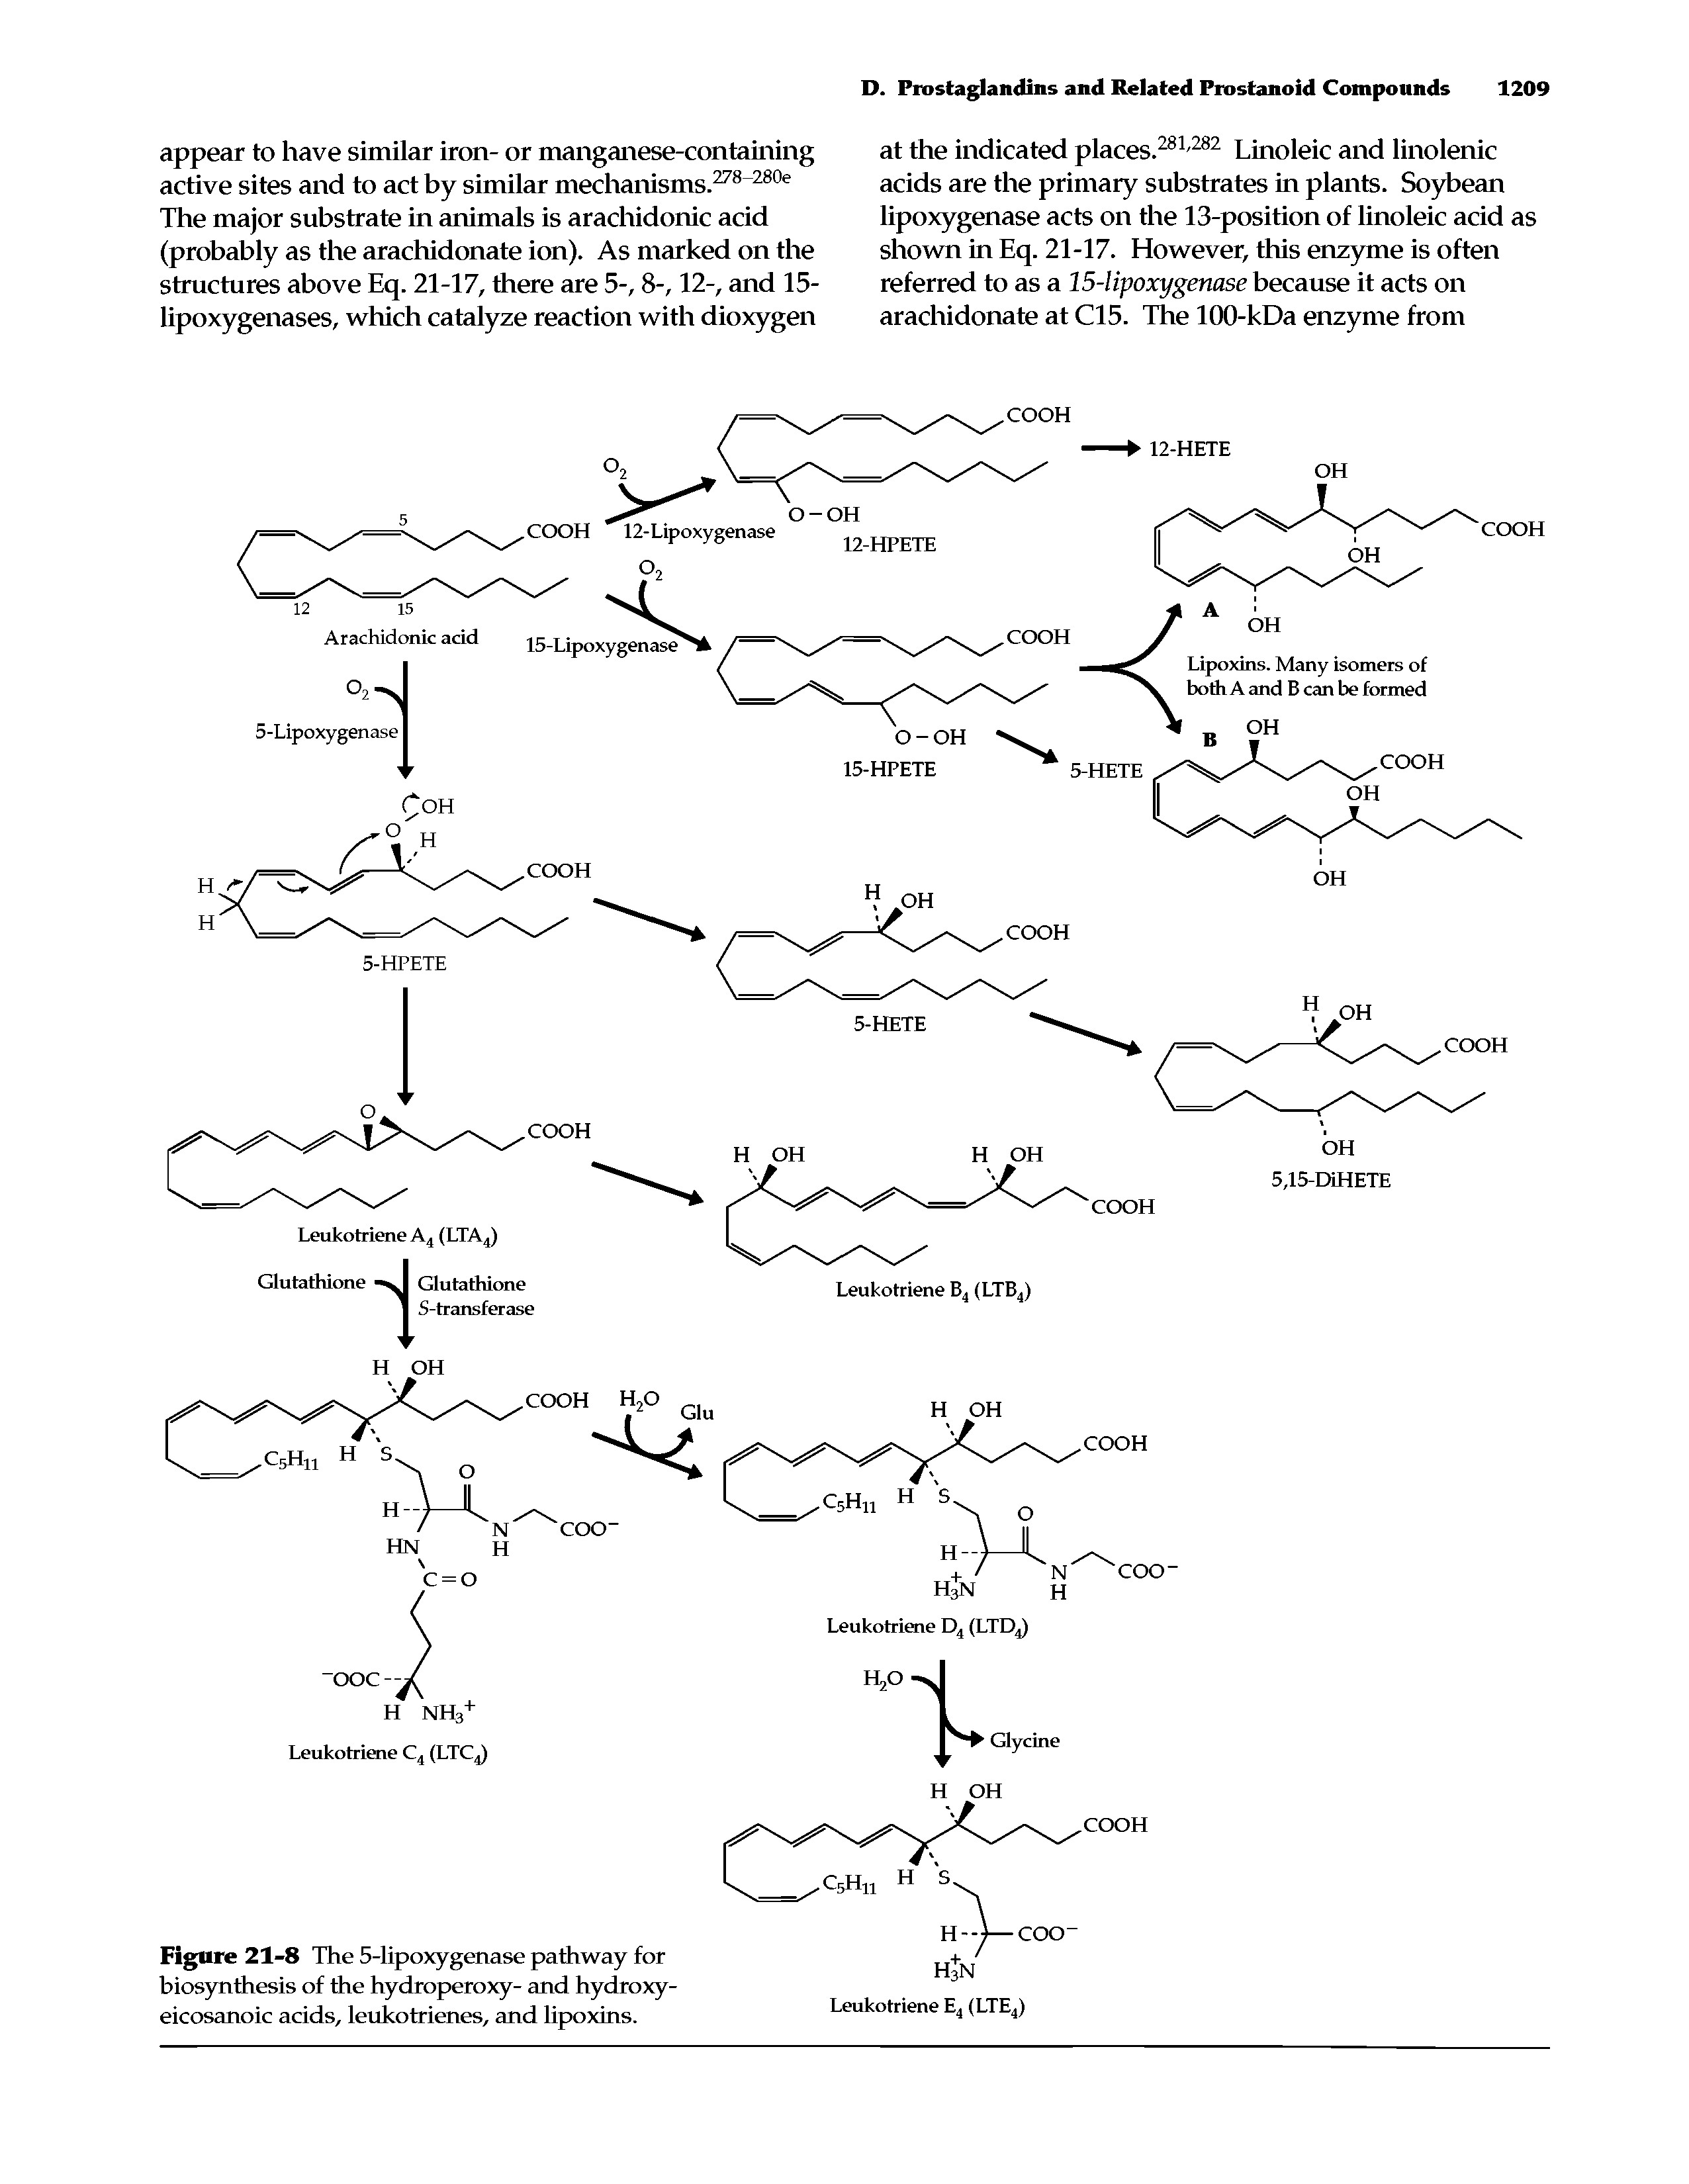 Figure 21-8 The 5-lipoxygenase pathway for biosynthesis of the hydroperoxy- and hydroxy-eicosanoic acids, leukotrienes, and lipoxins.